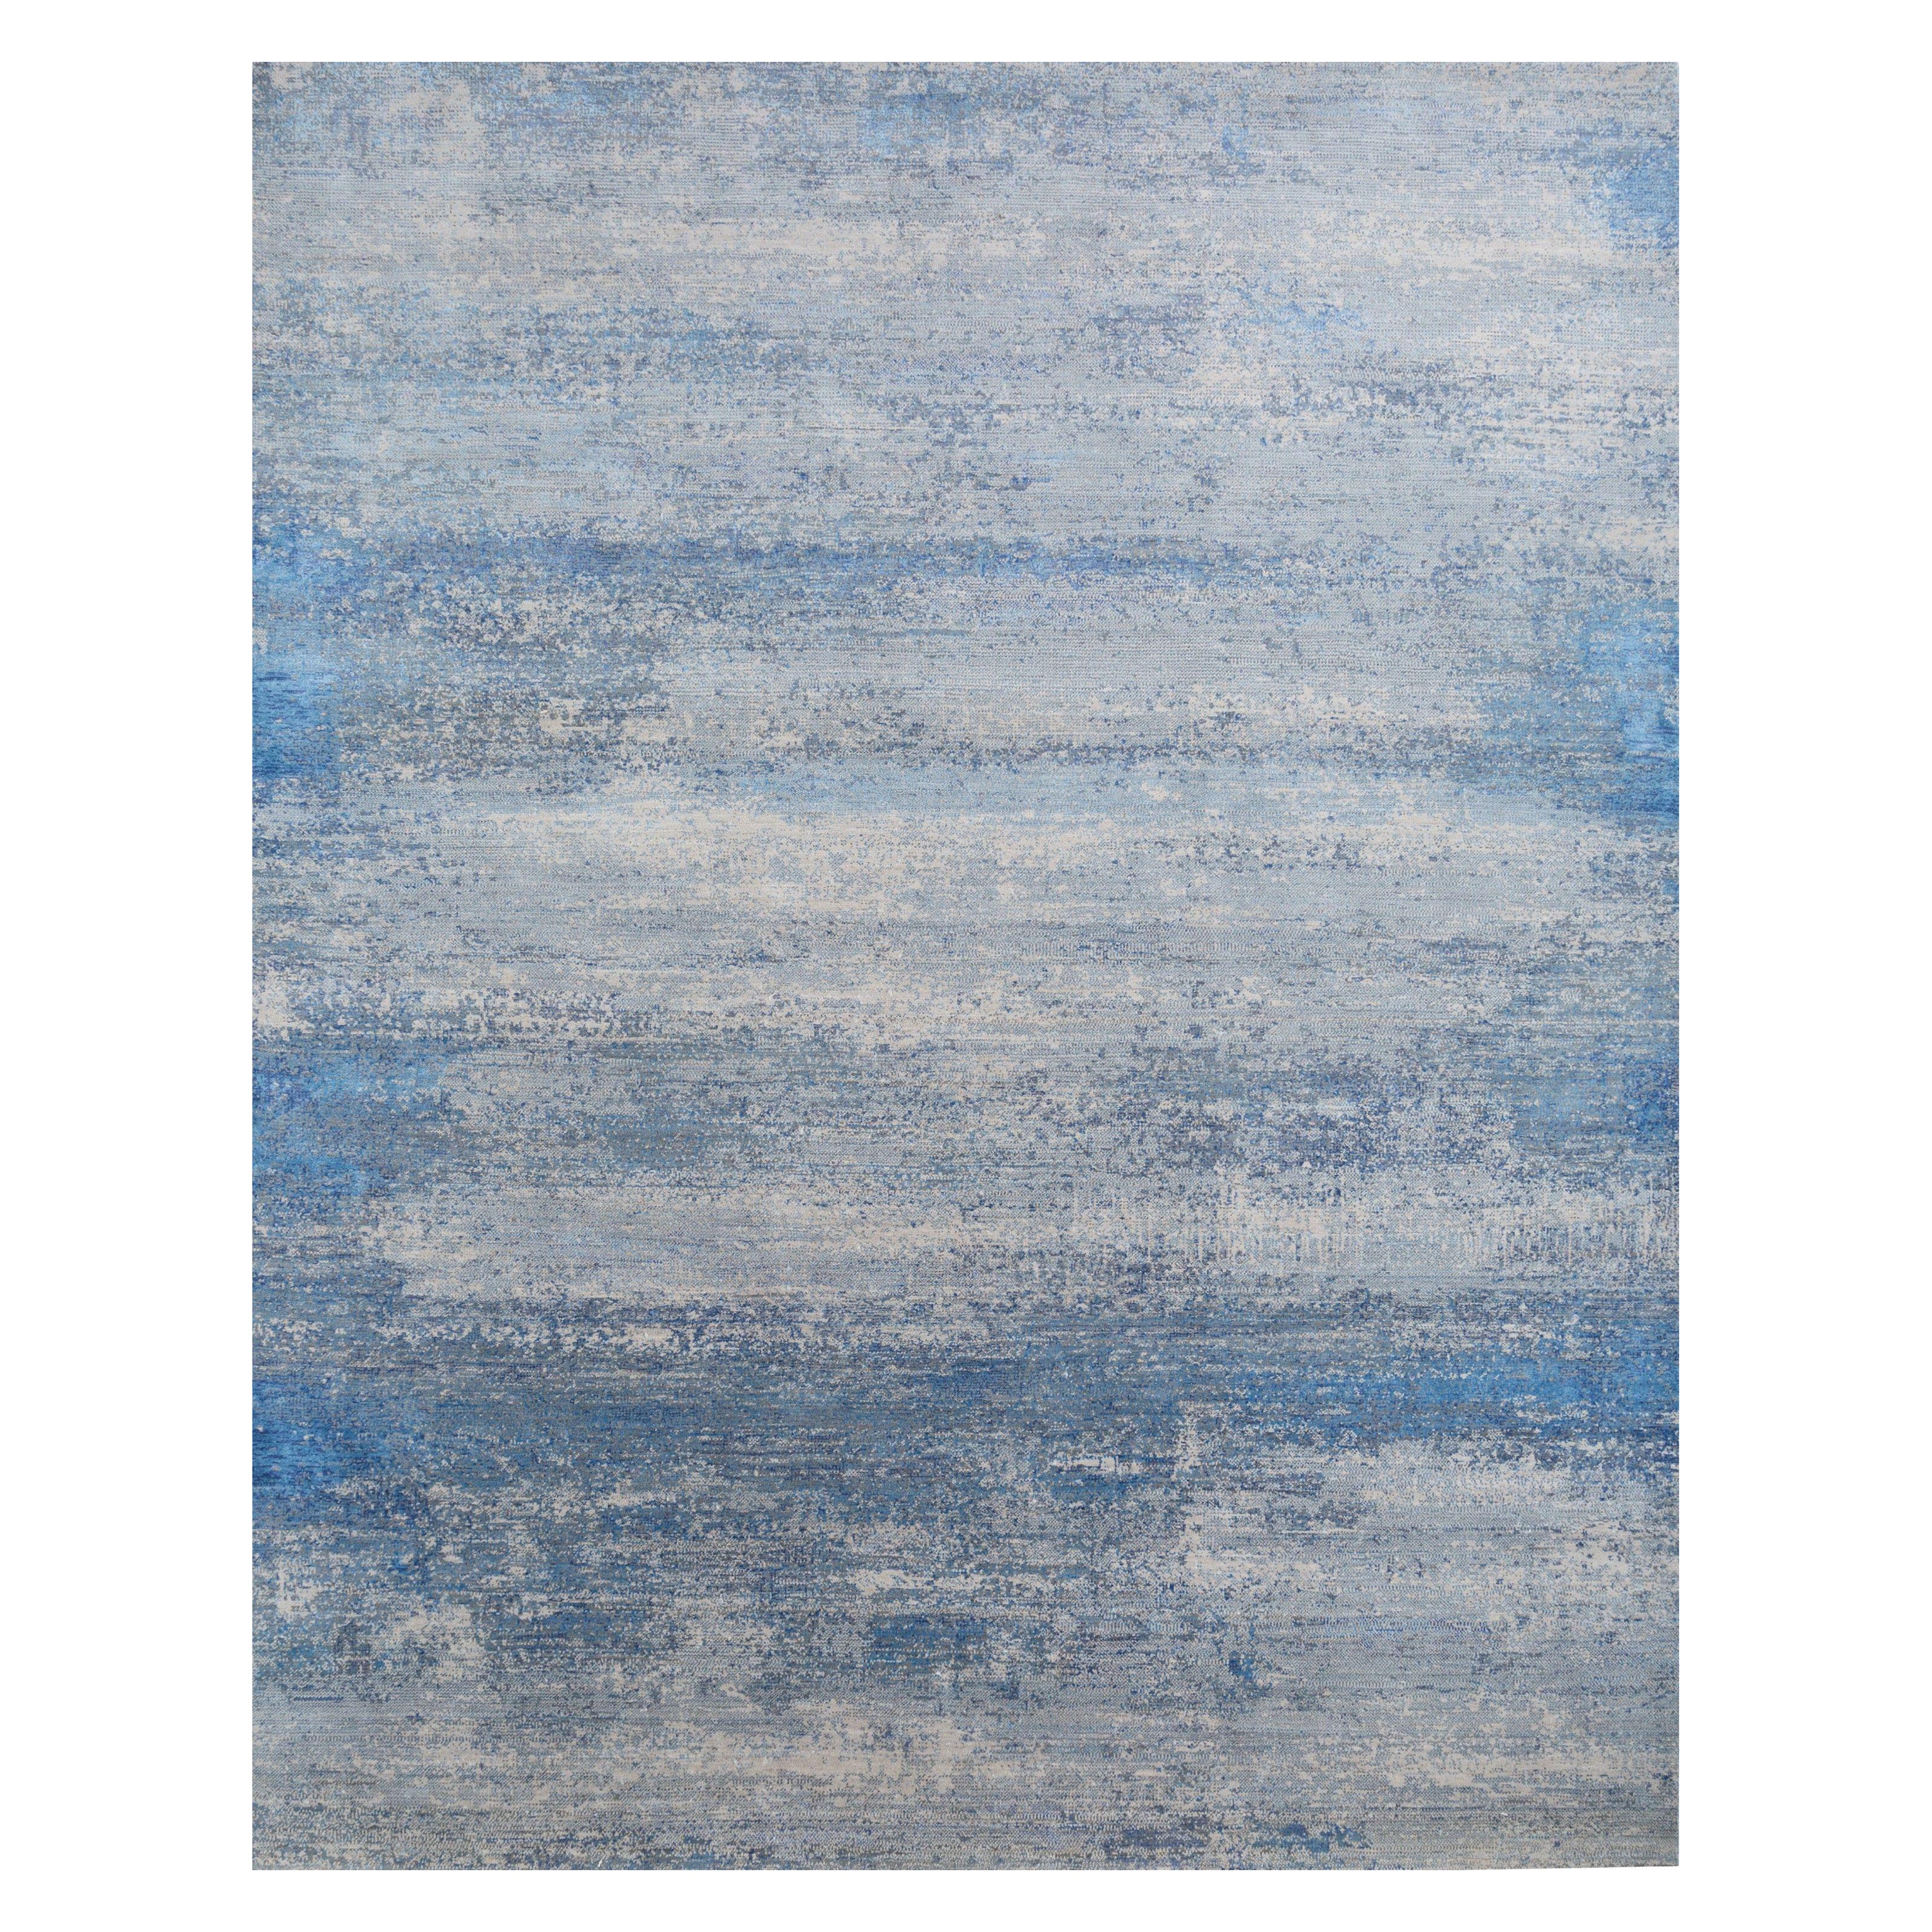 Serenity Leap Classic Gray & Bermuda Blue 300X420 Cm Handknotted Rug For Sale